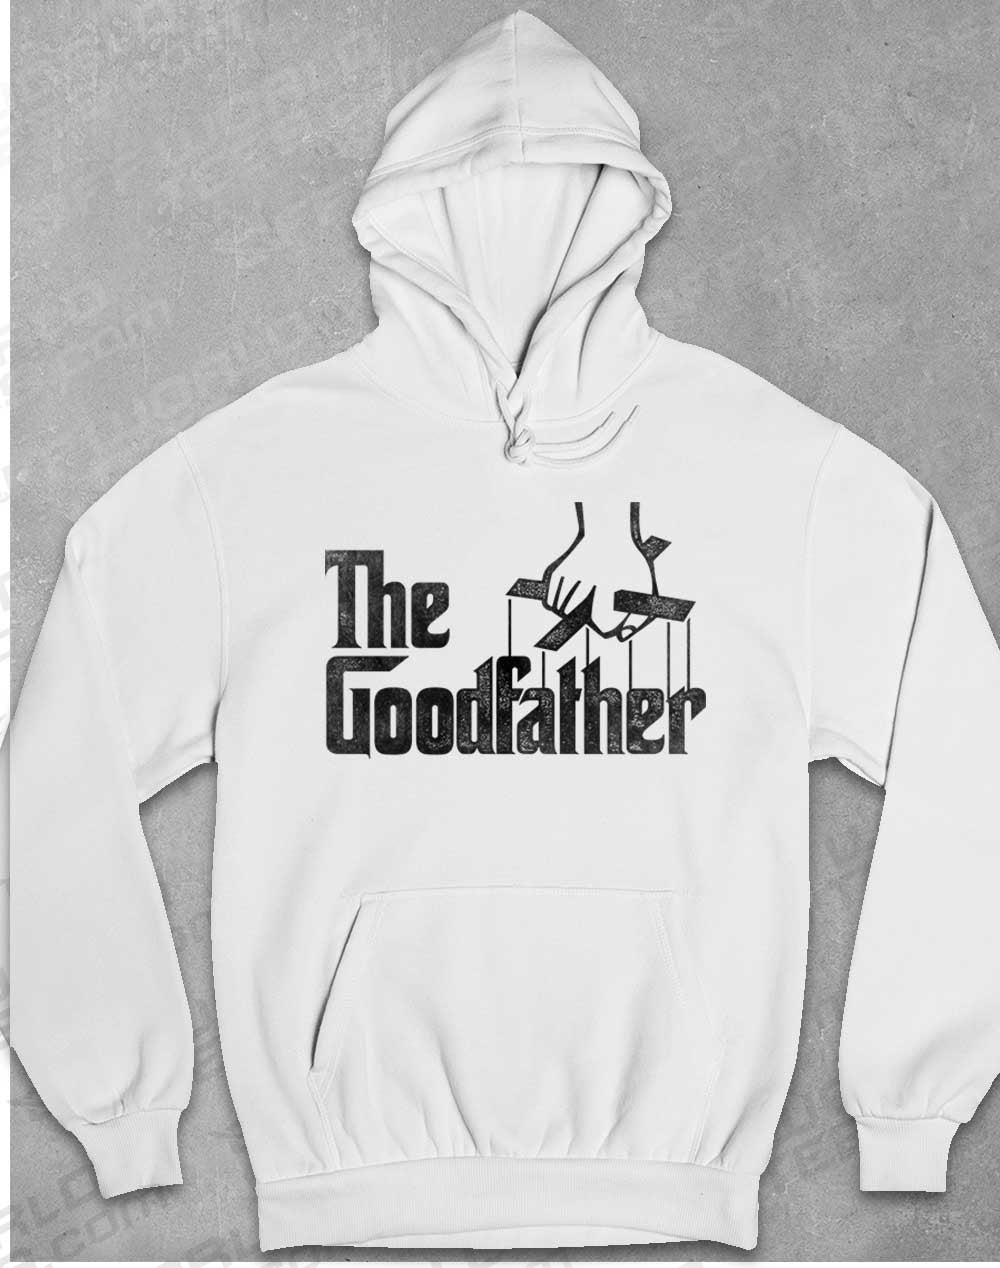 Arctic White - The Goodfather Hoodie